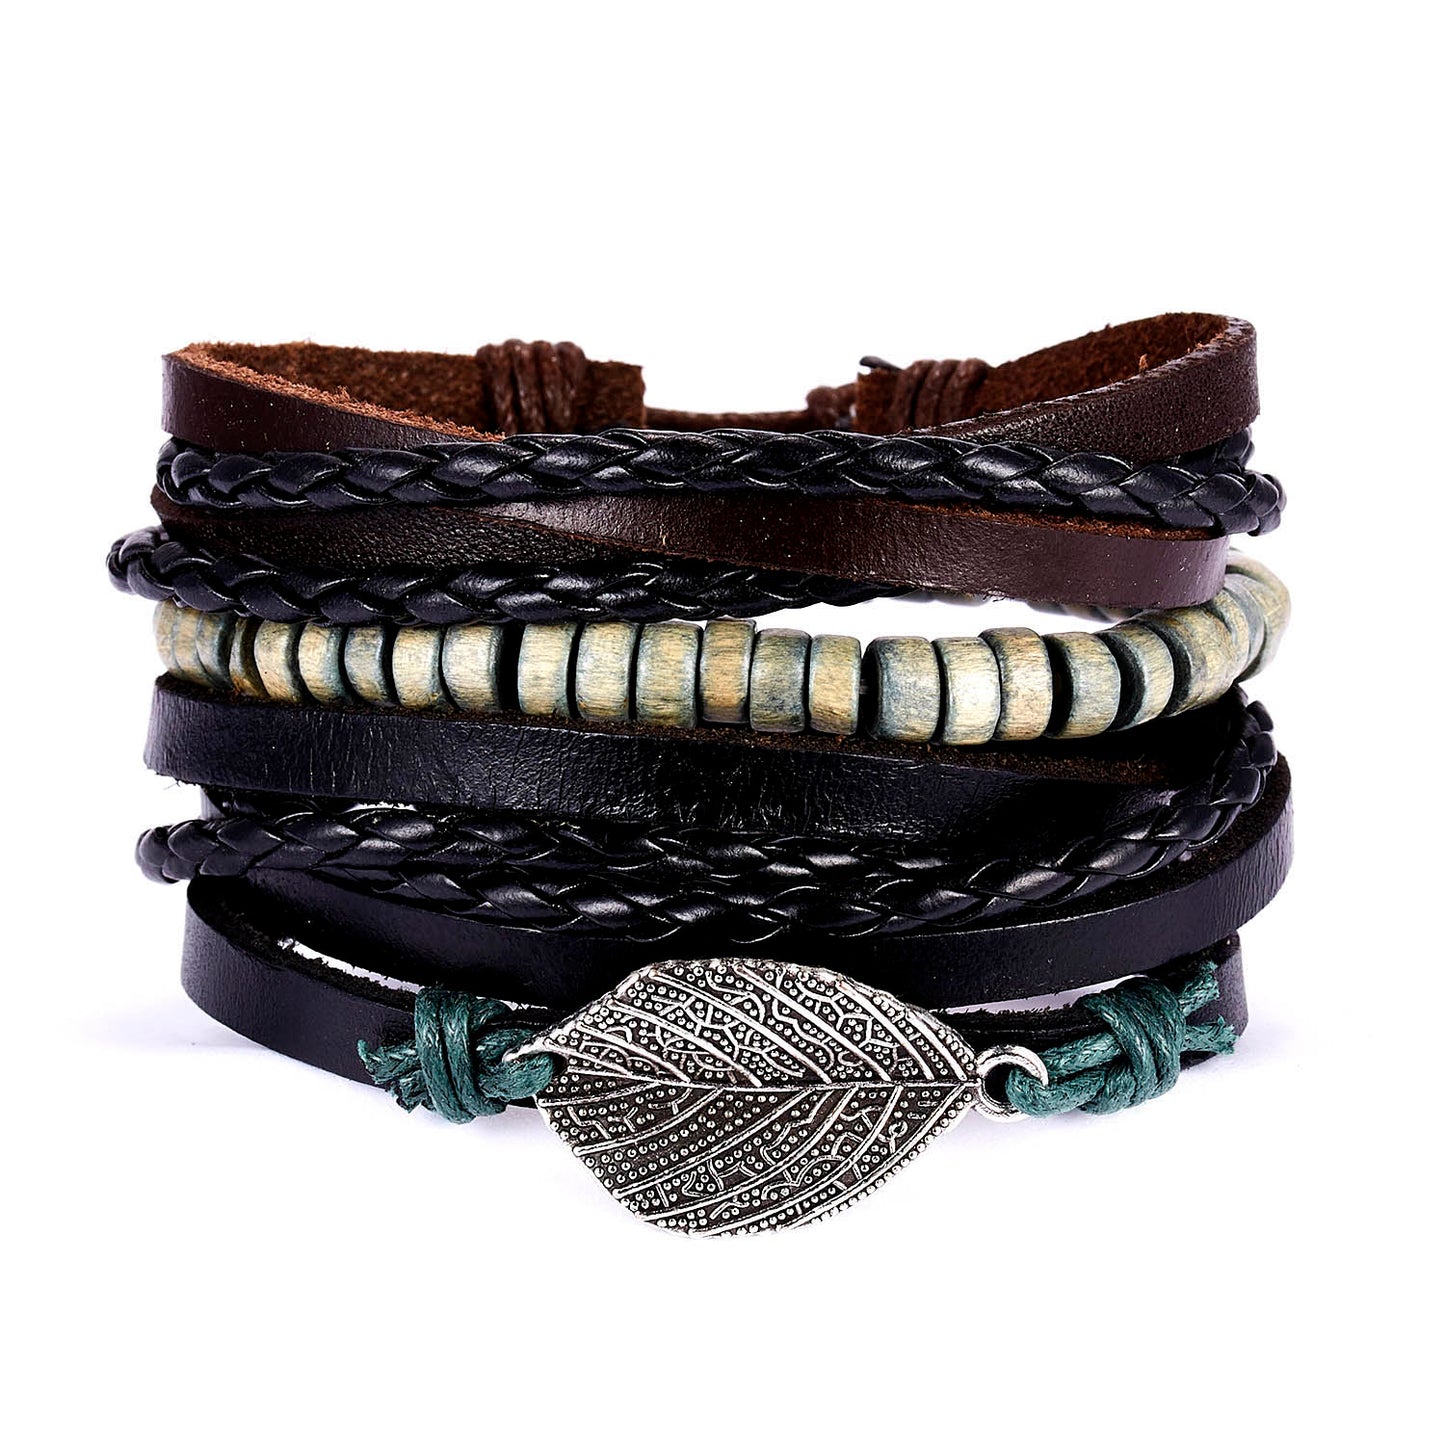 Vintage Multiple Layers Leather Bracelet Set For Women Men Leaf Feather Handmade Braided Wrap Charm Bracelet Jewelry Accessories